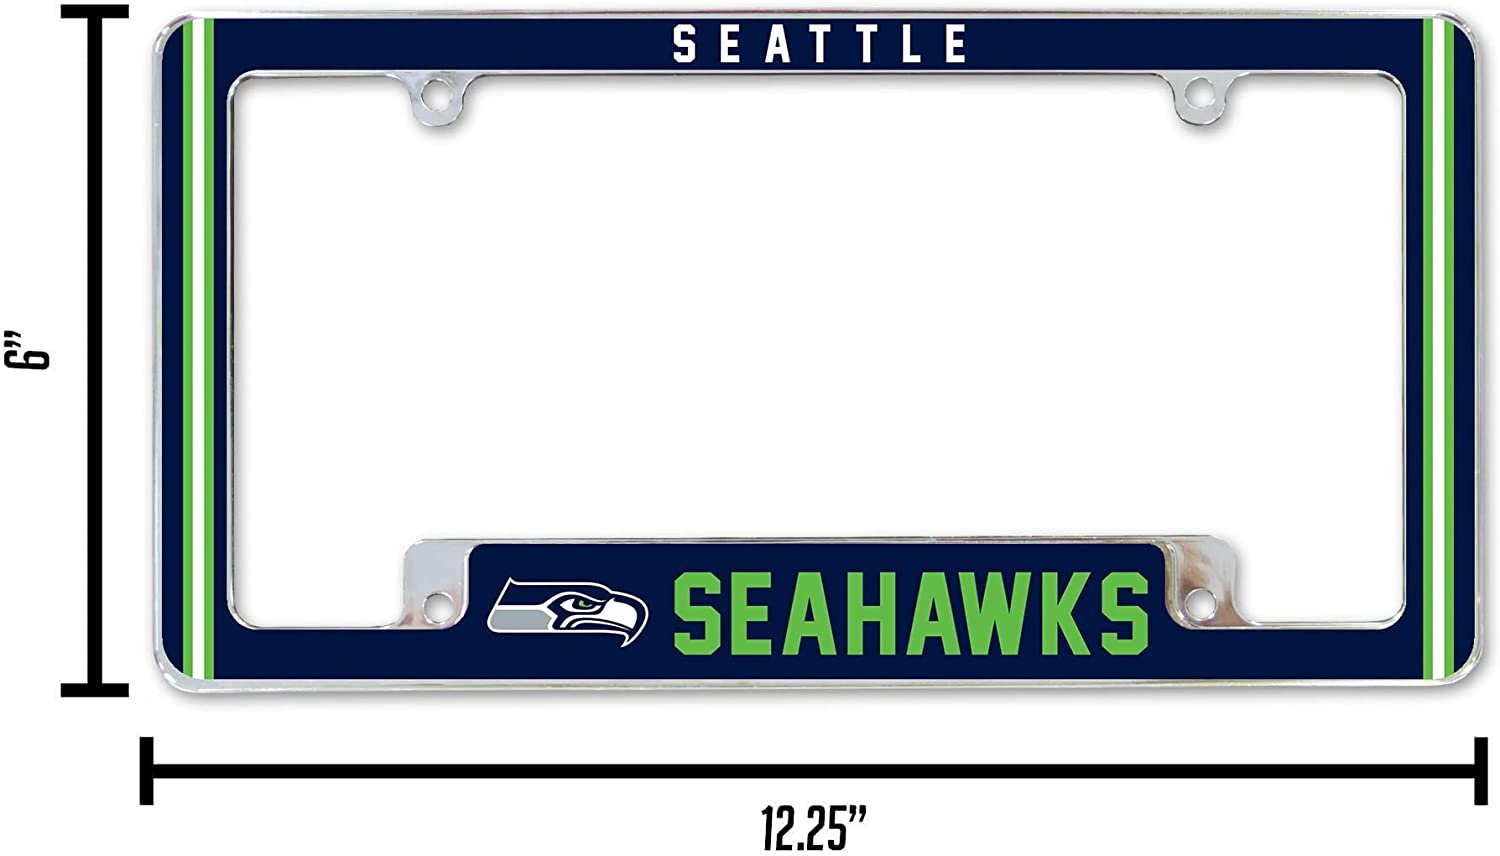 Seattle Seahawks Metal License Plate Frame Chrome Tag Cover Alternate Design 6x12 Inch